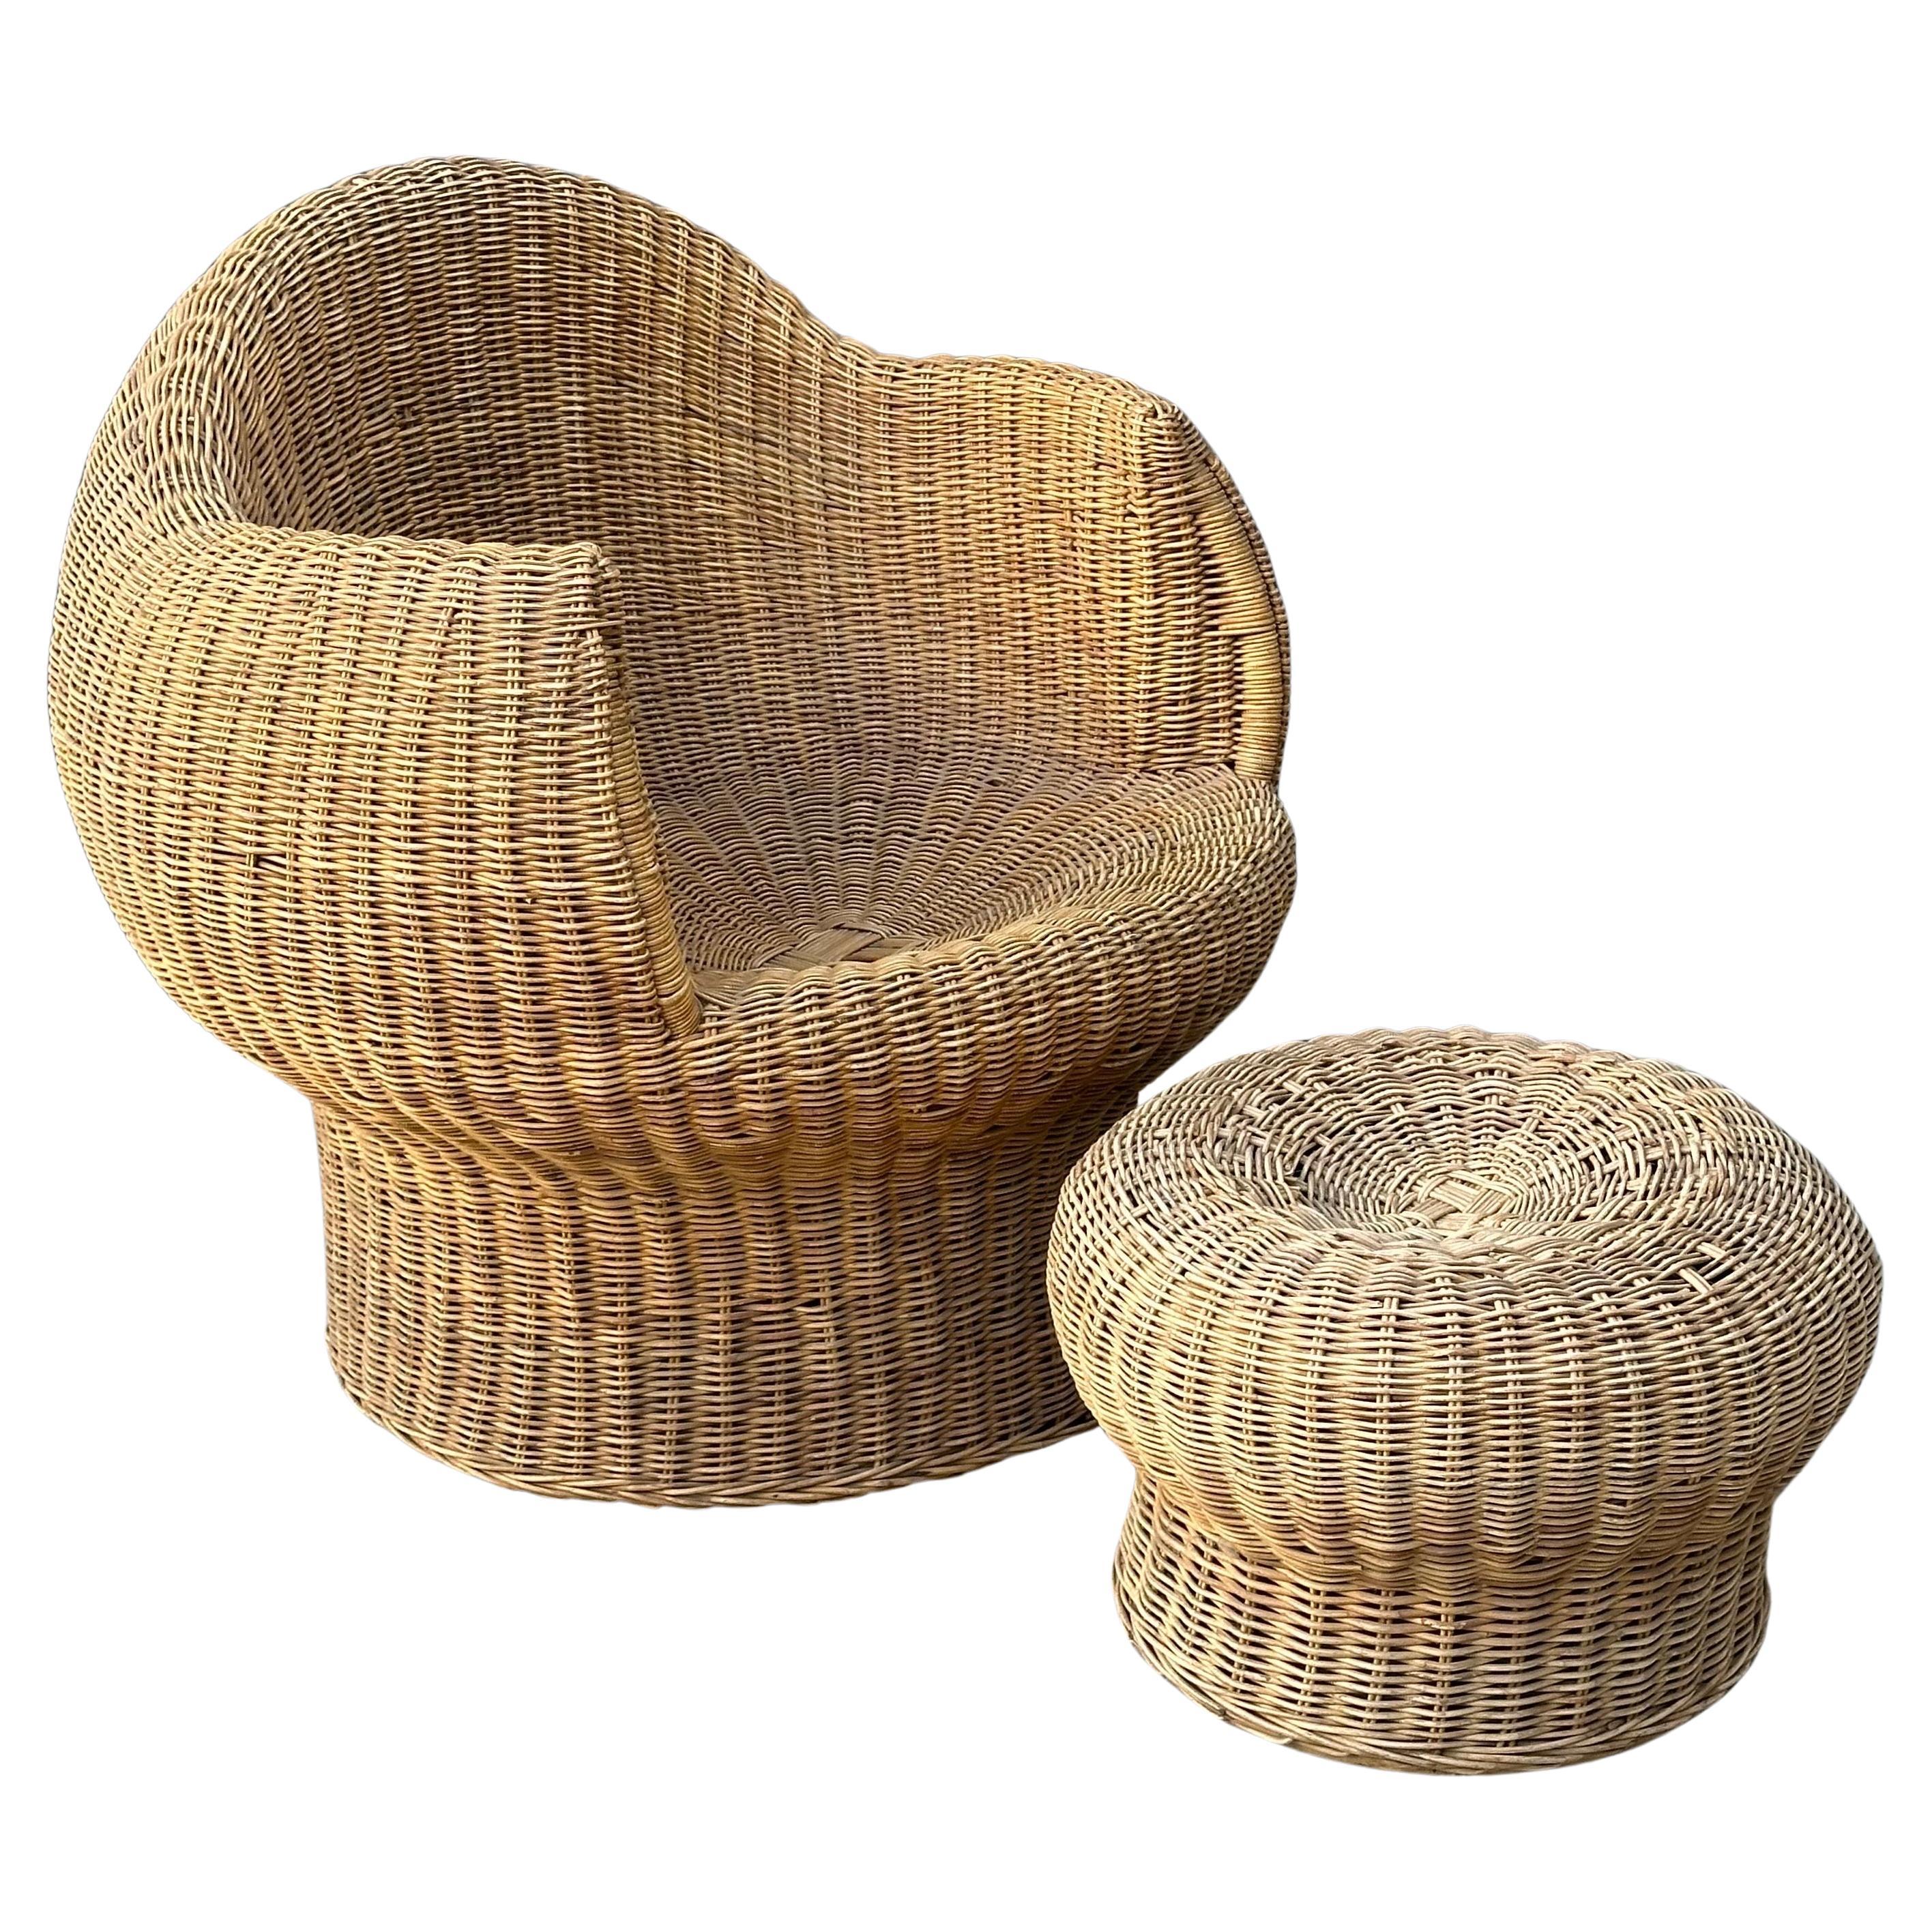 Boho Style Sculptural Wicker Chair and Ottoman